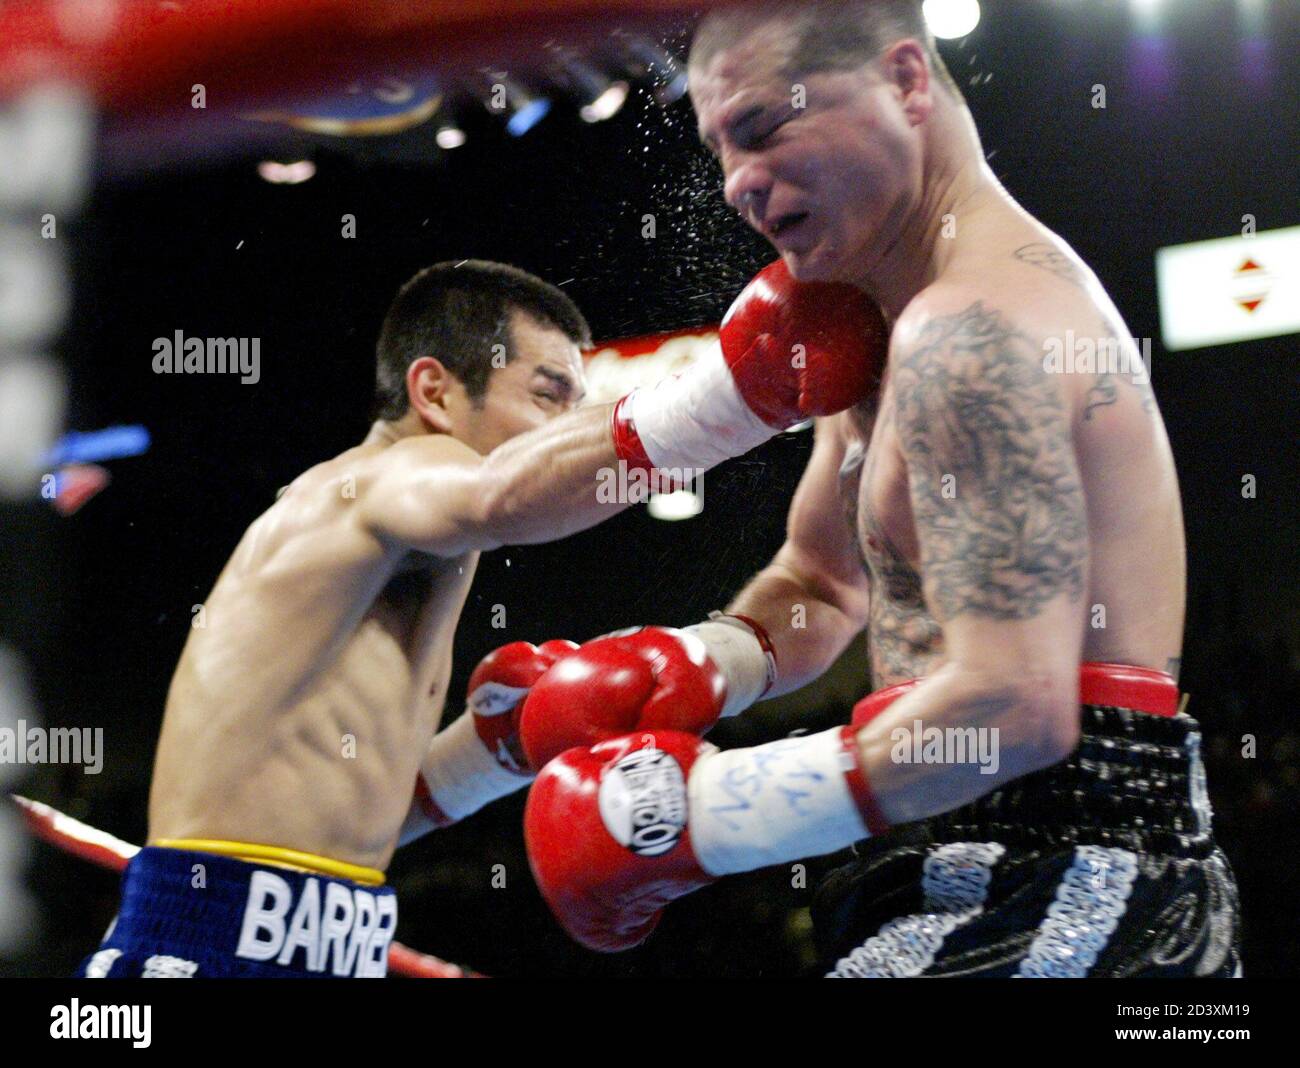 Featherweight boxer Marco Antonio Barrera (L) of Iztacalo, Mexico, lands a right on Johnny Tapia of Albuquerque, New Mexico, during the fourth round of a 12-round fight at the MGM Grand Garden Arena Las Vegas, Nevada, November 2, 2002.  Barrera won the bout by unanimous decision. Stock Photo